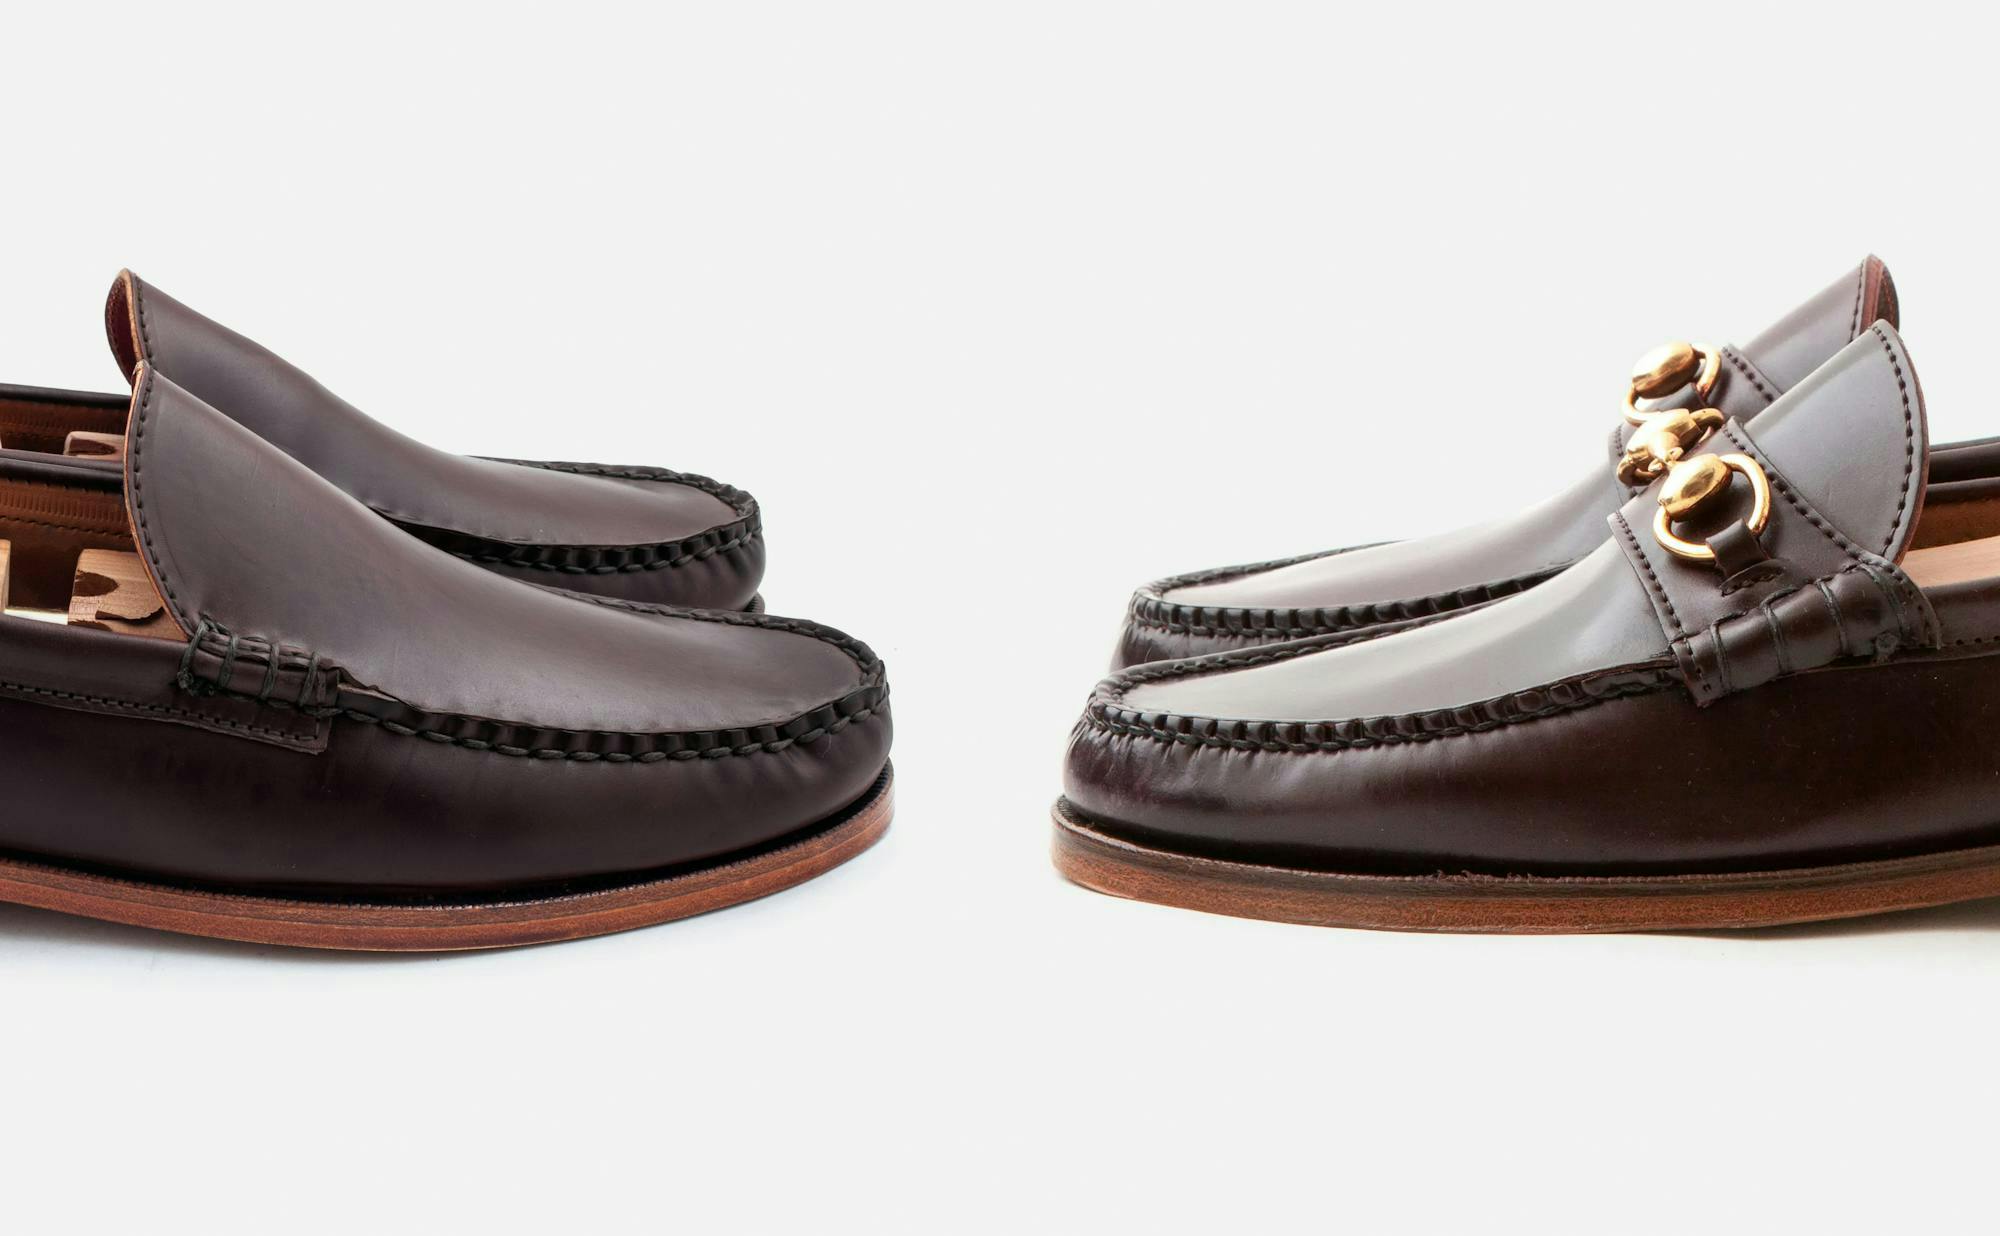 Profile views of two Rancourt loafers in color 8 shell cordovan.